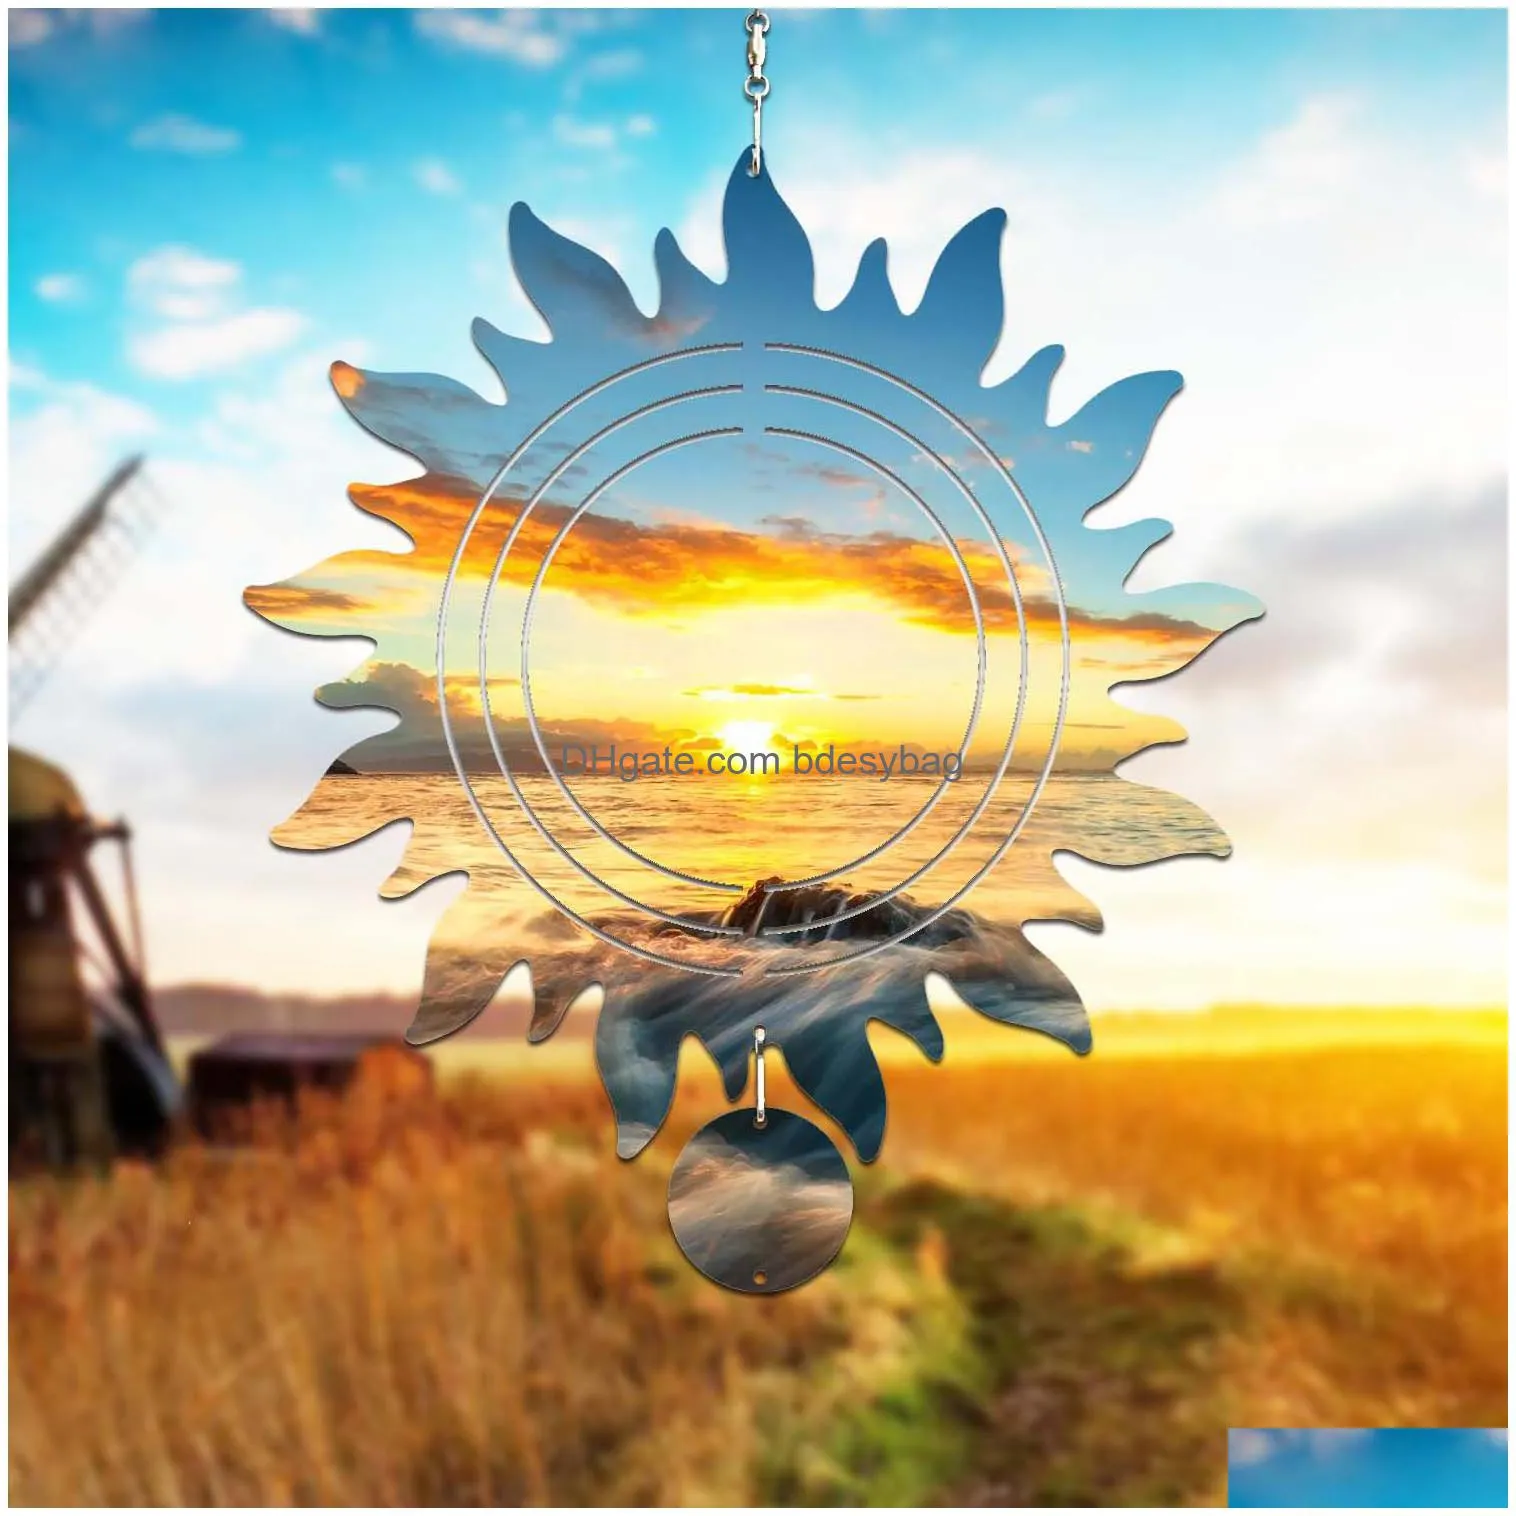 sublimation wind spinner blanks products metal sun shape wind chime sculpture hanging ornament for yard garden decoration